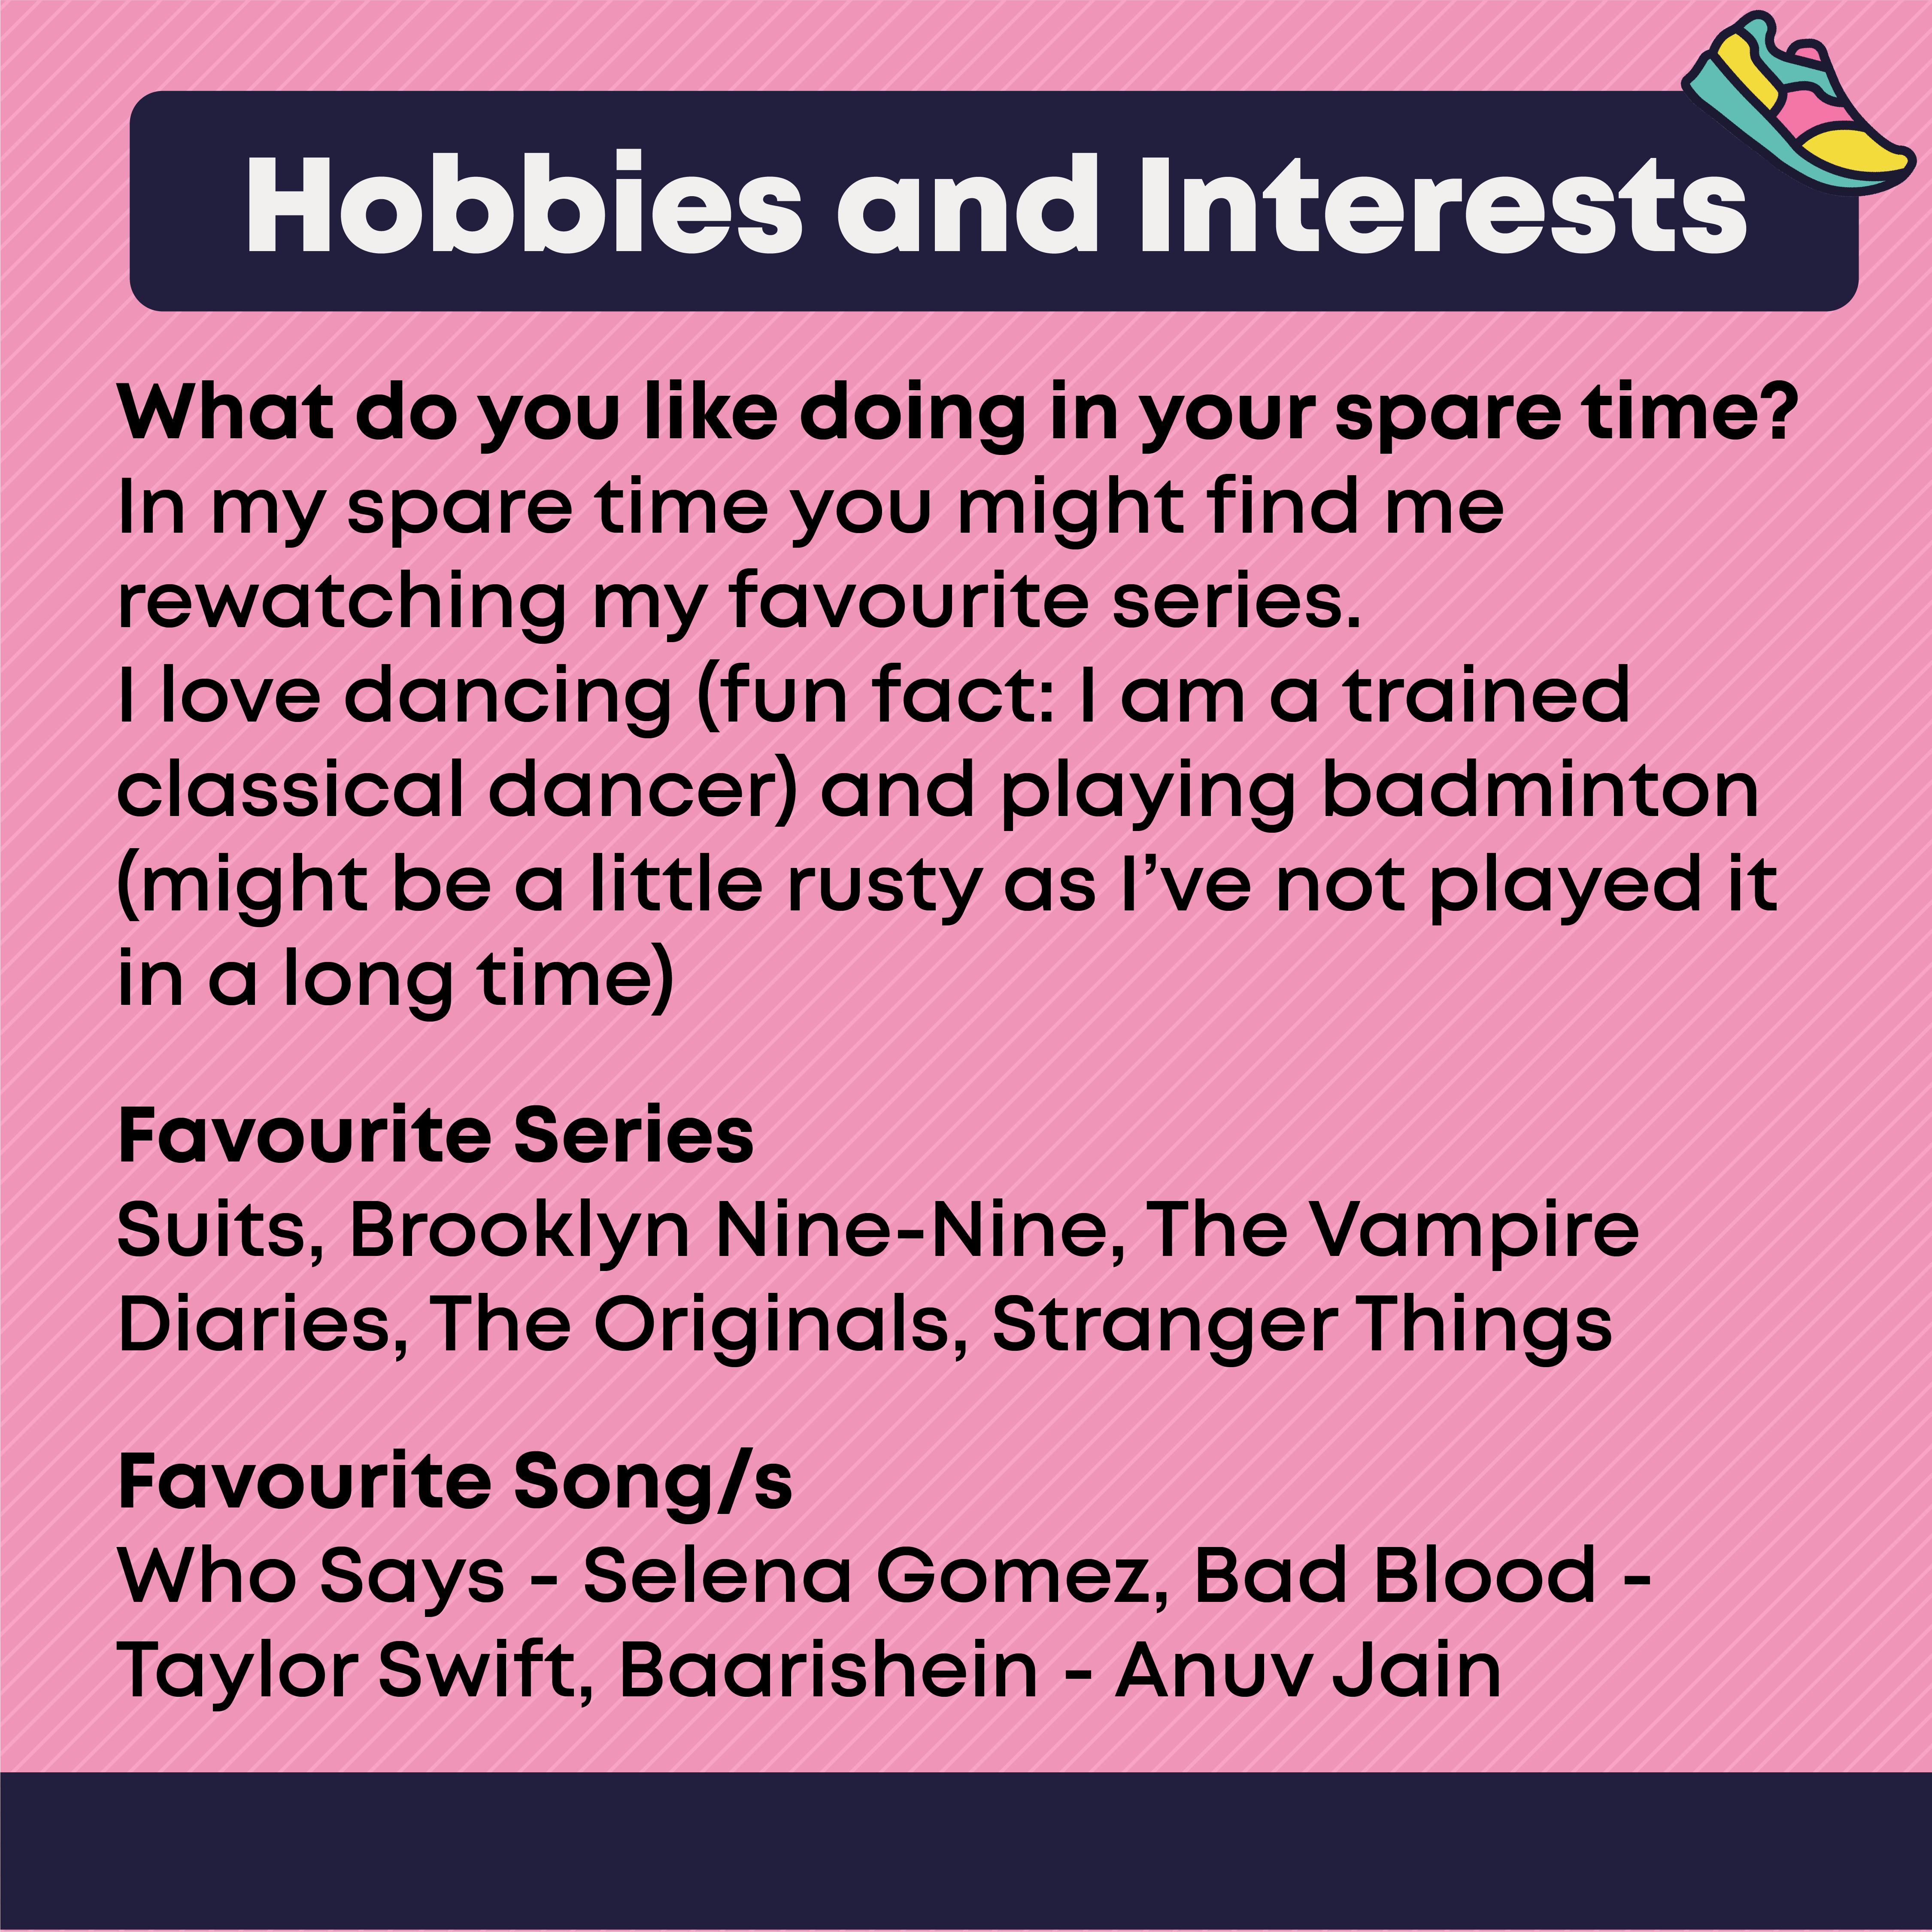 Hobbies and Interests  What you like doing in your spare time  In my spare time you might find me rewatching my favourite series. I love dancing (fun fact: I am a trained classical dancer) and playing badminton (might be a little rusty as I’ve not played it in a long time)    Favourite Series: Suits, Brooklyn Nine-Nine, The Vampire Diaries, The Originals, Stranger Things  Favourite Song/s: Who Says - Selena Gomez, Bad Blood - Taylor Swift, Baarishein - Anuv Jain